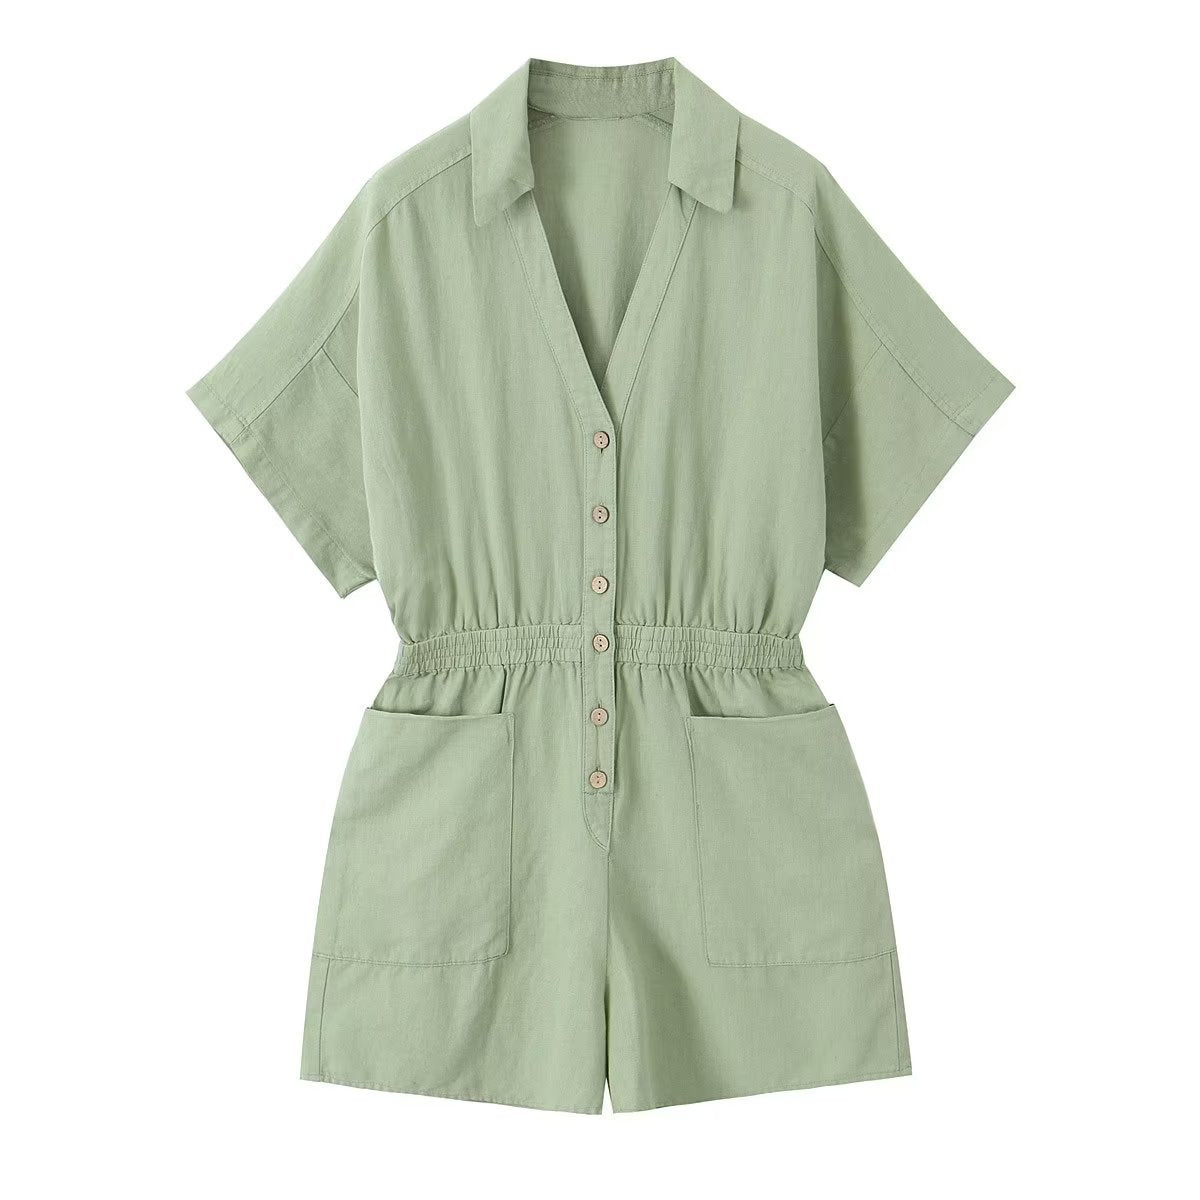 NTG Fad Jumpsuits & Rompers/Jumpsuits Light green / S Spring linen-blend striped cropped playsuit